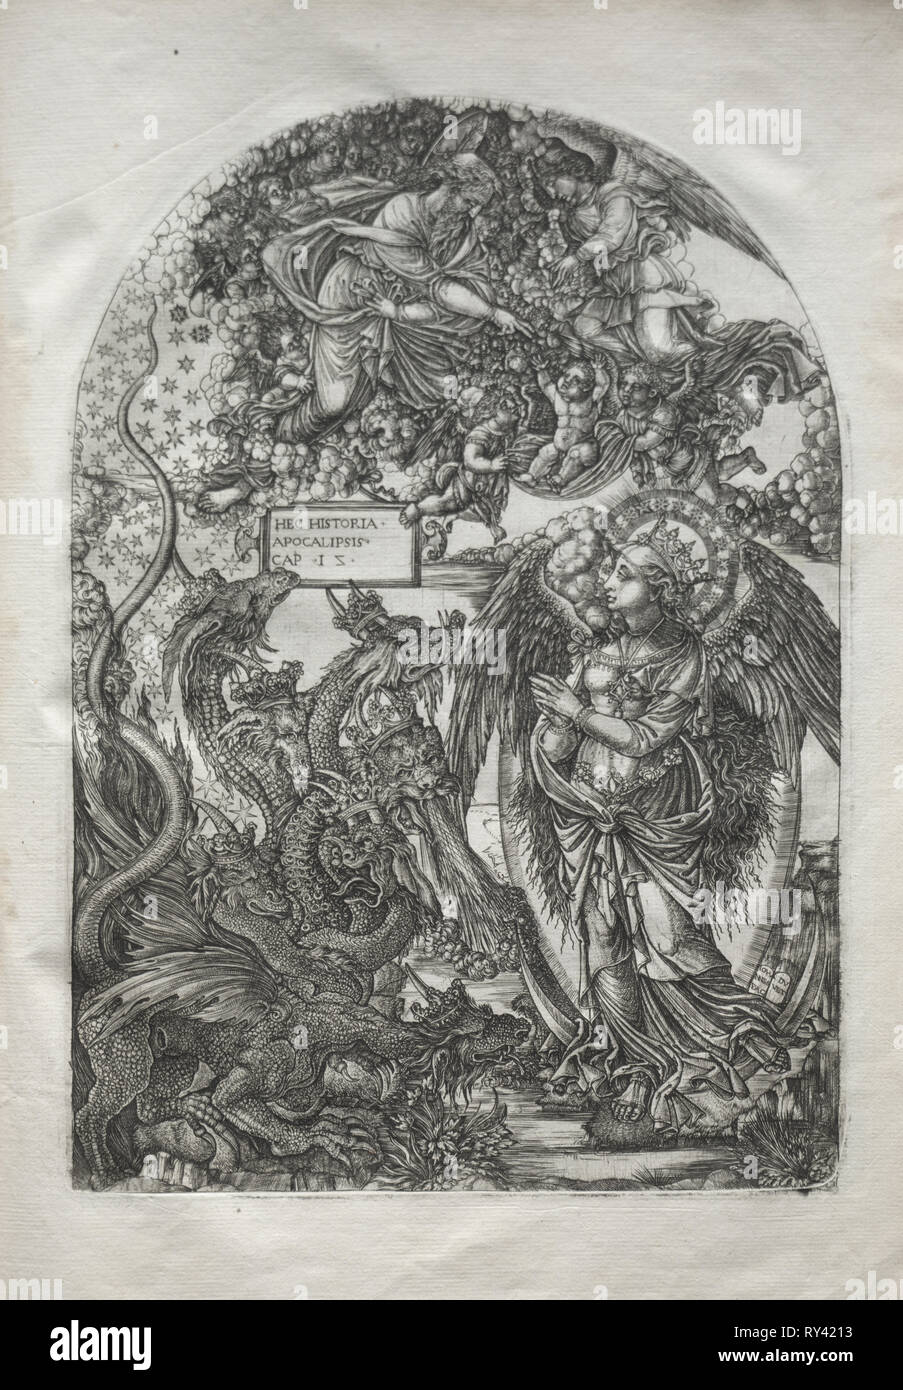 The Apocalypse:  St. Michael and the Dragon, 1546-1556. Jean Duvet (French, 1485-1561). Engraving Stock Photo